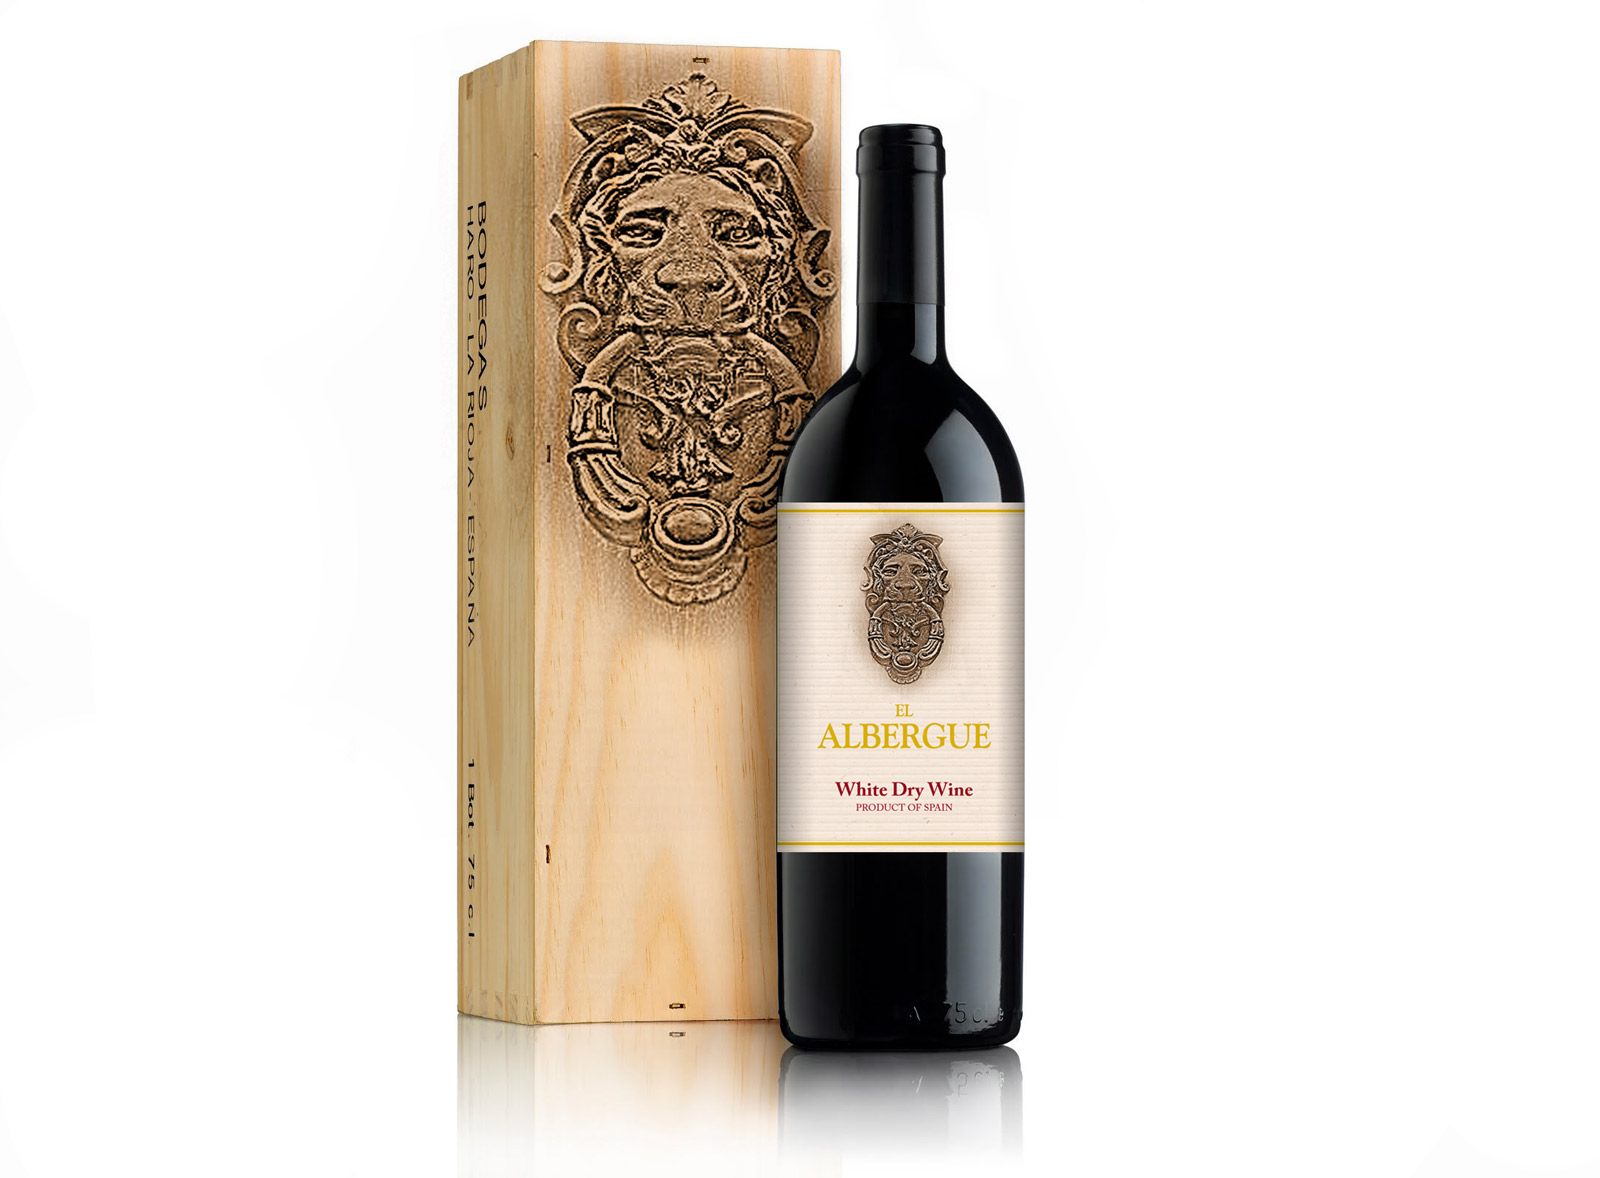 Portfolio of graphic and creative design jobs classic wine labels and packaging for Spanish wine